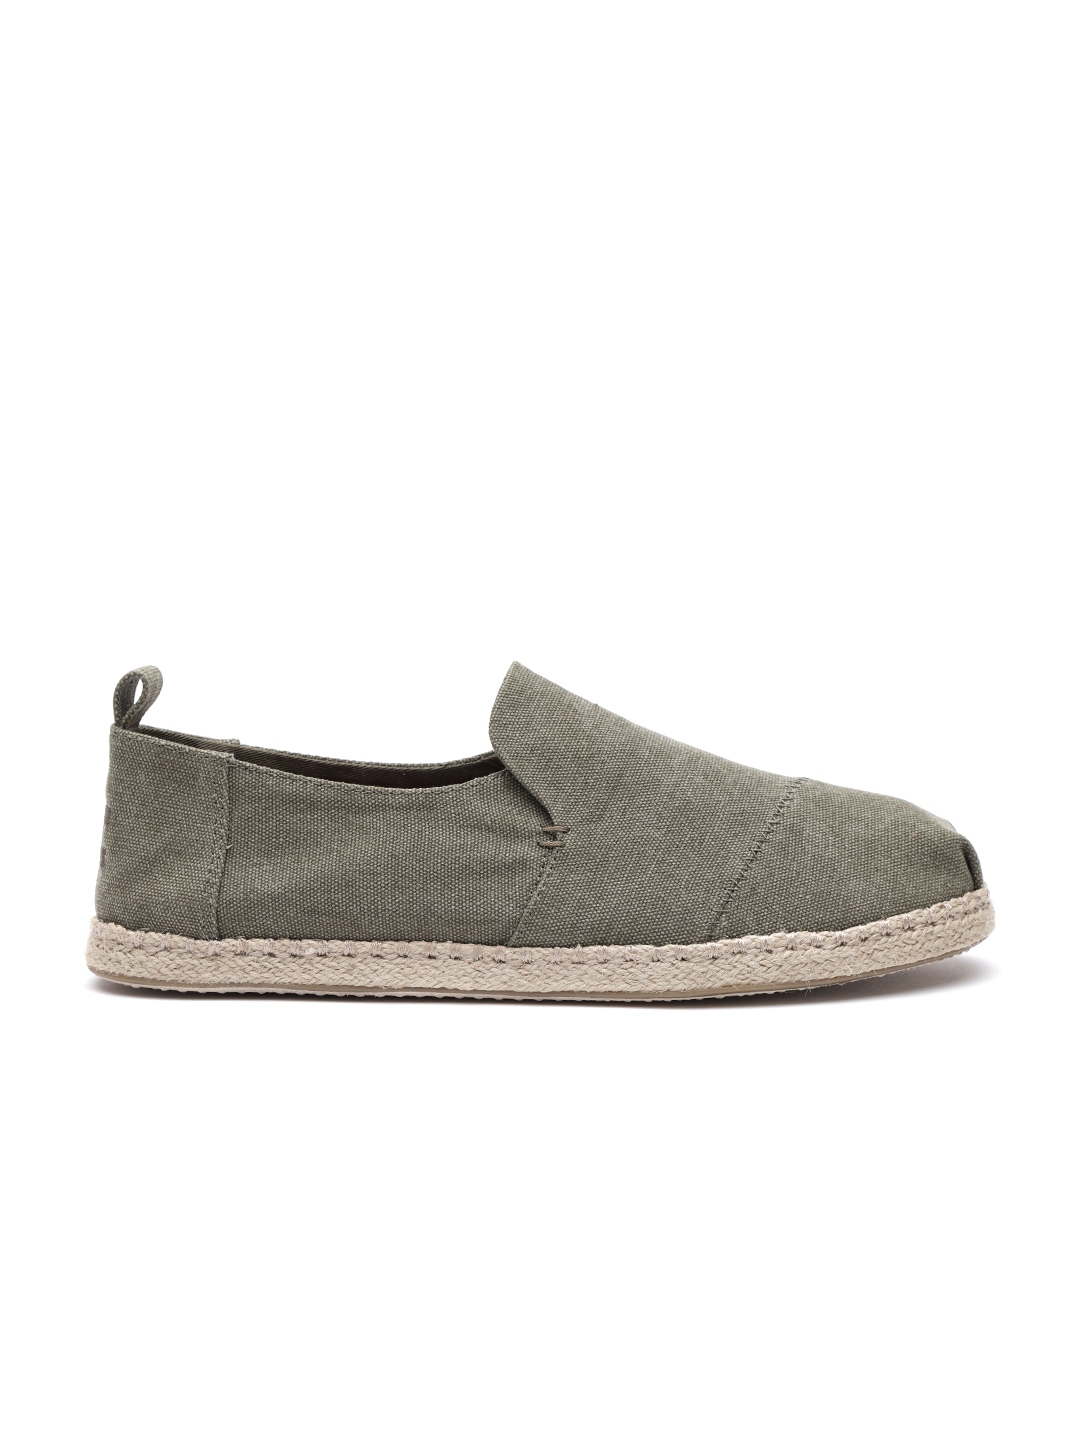 toms shoes olive green